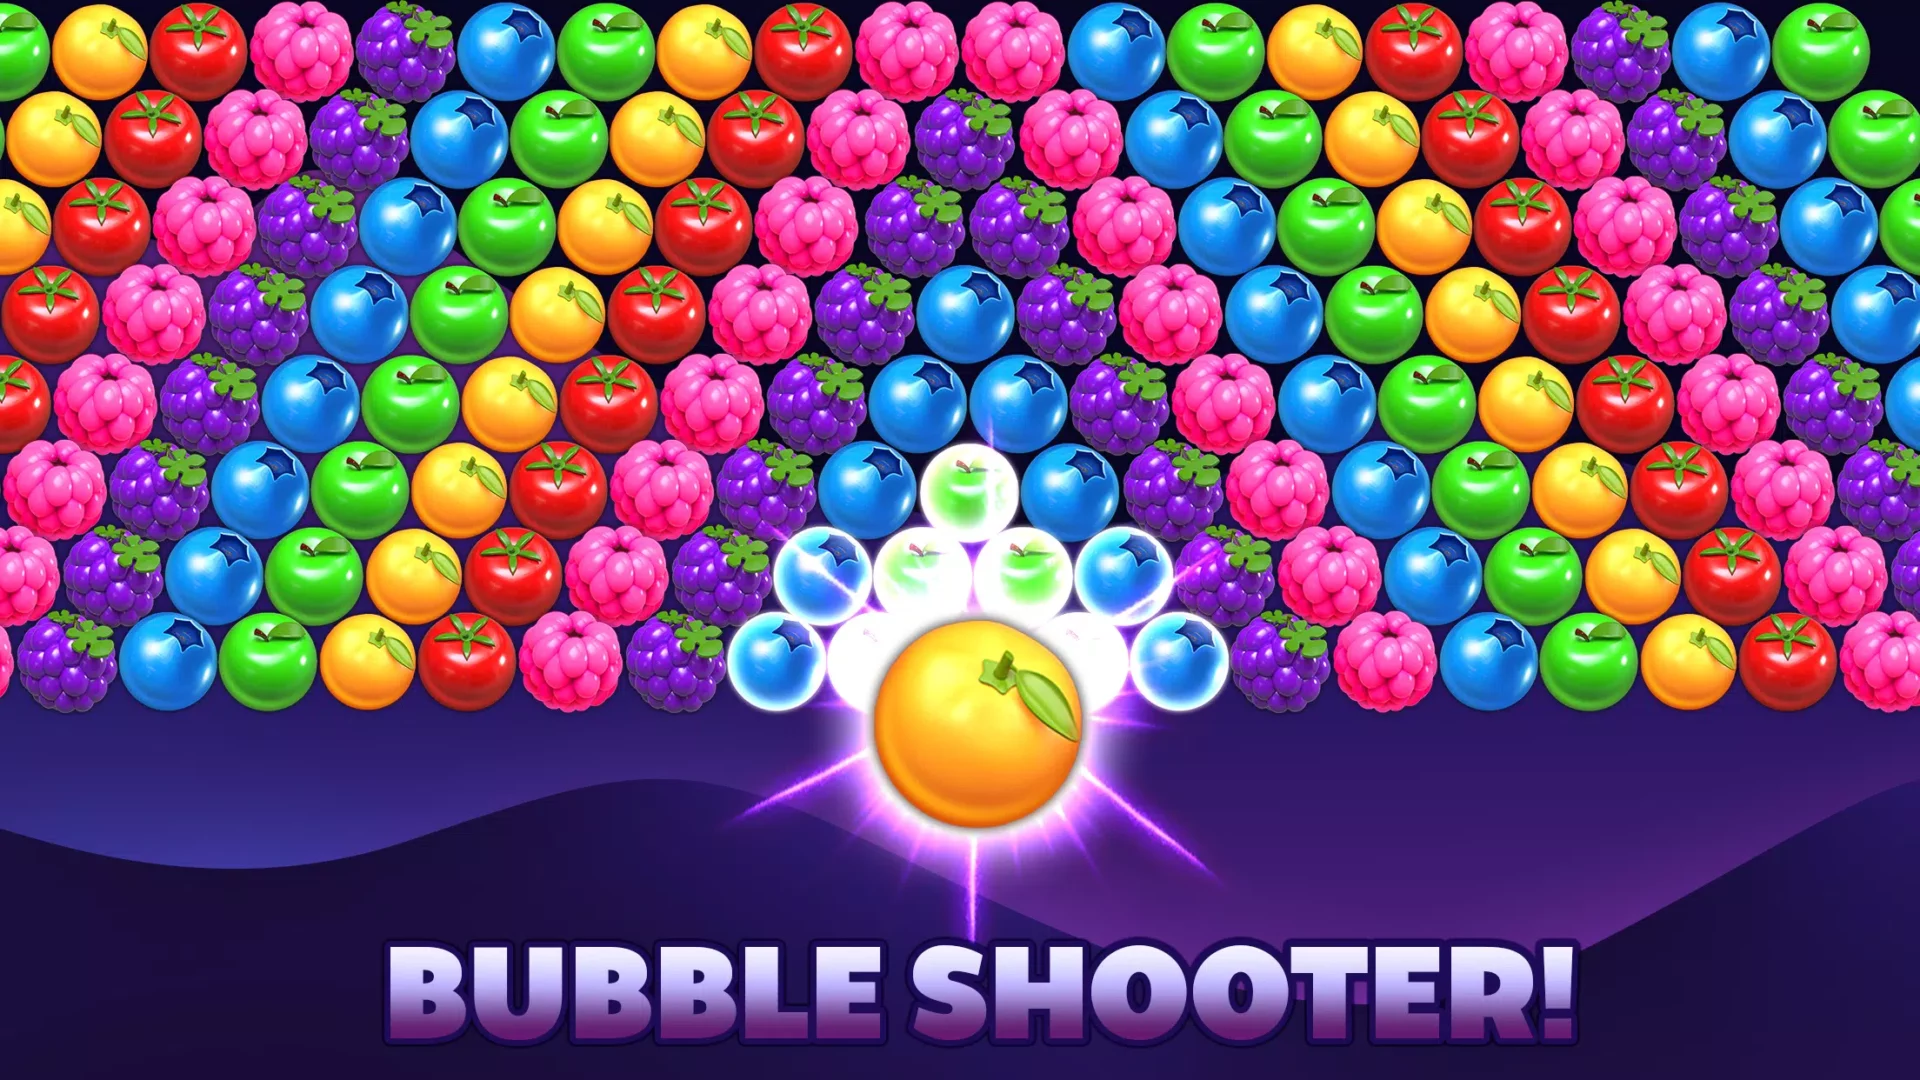 Becoming a Bubble Shooter Pro: Advanced Techniques and Patterns